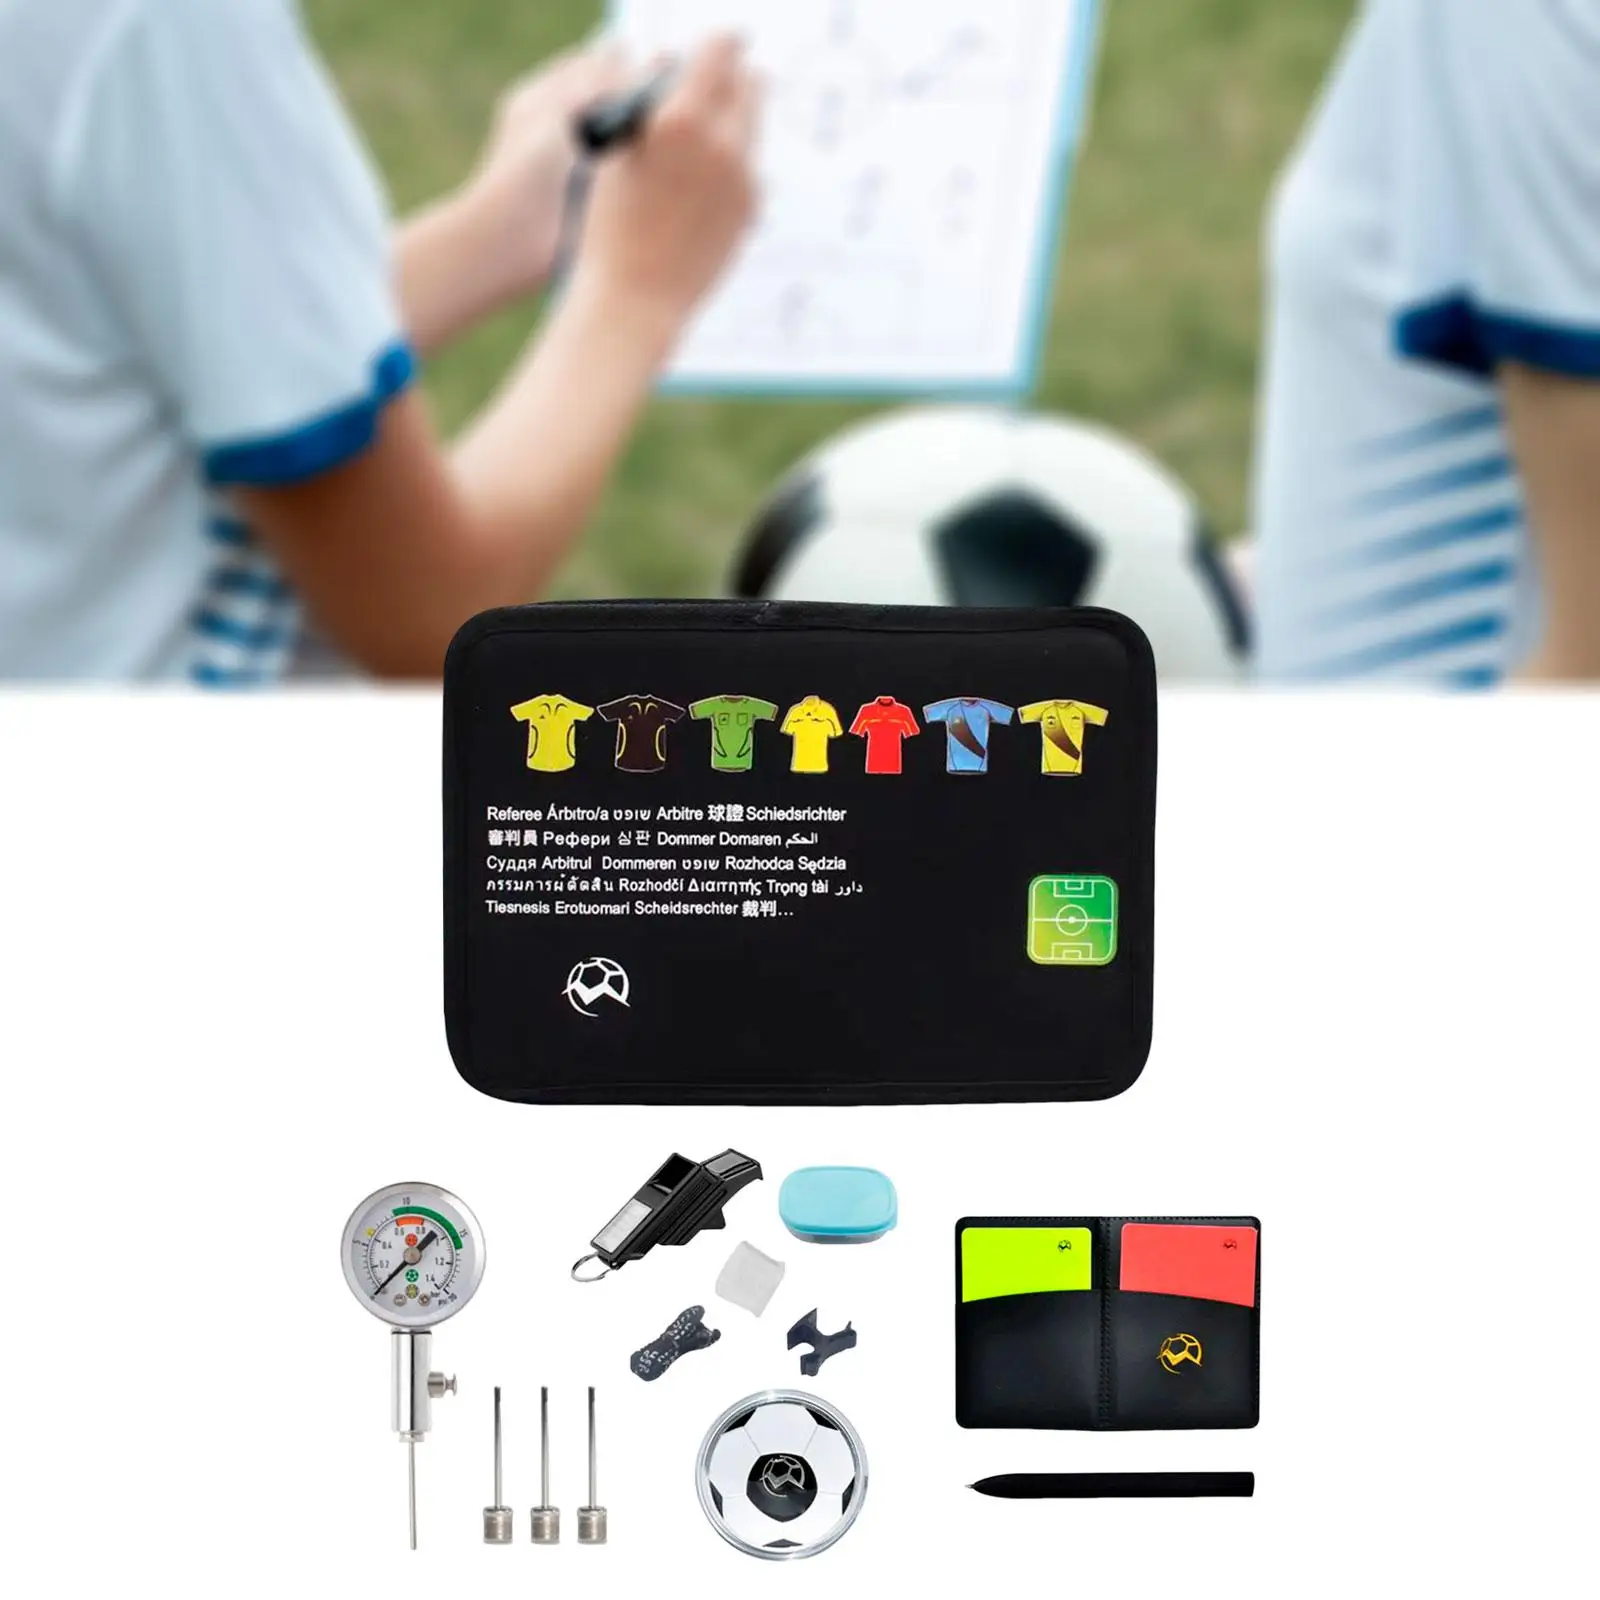 Soccer Referee Accessory Bag Whistle Pressure Gauge Pencil Equipment for Football